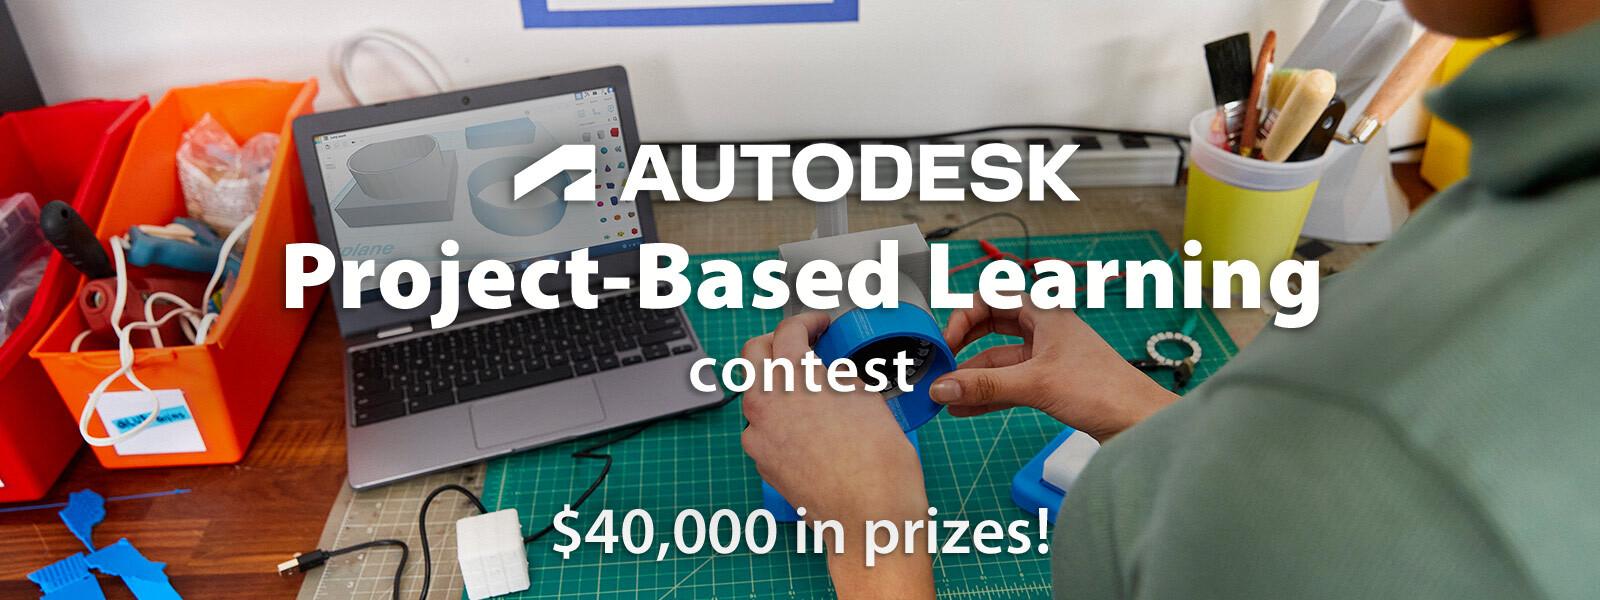 Project-Based Learning Contest